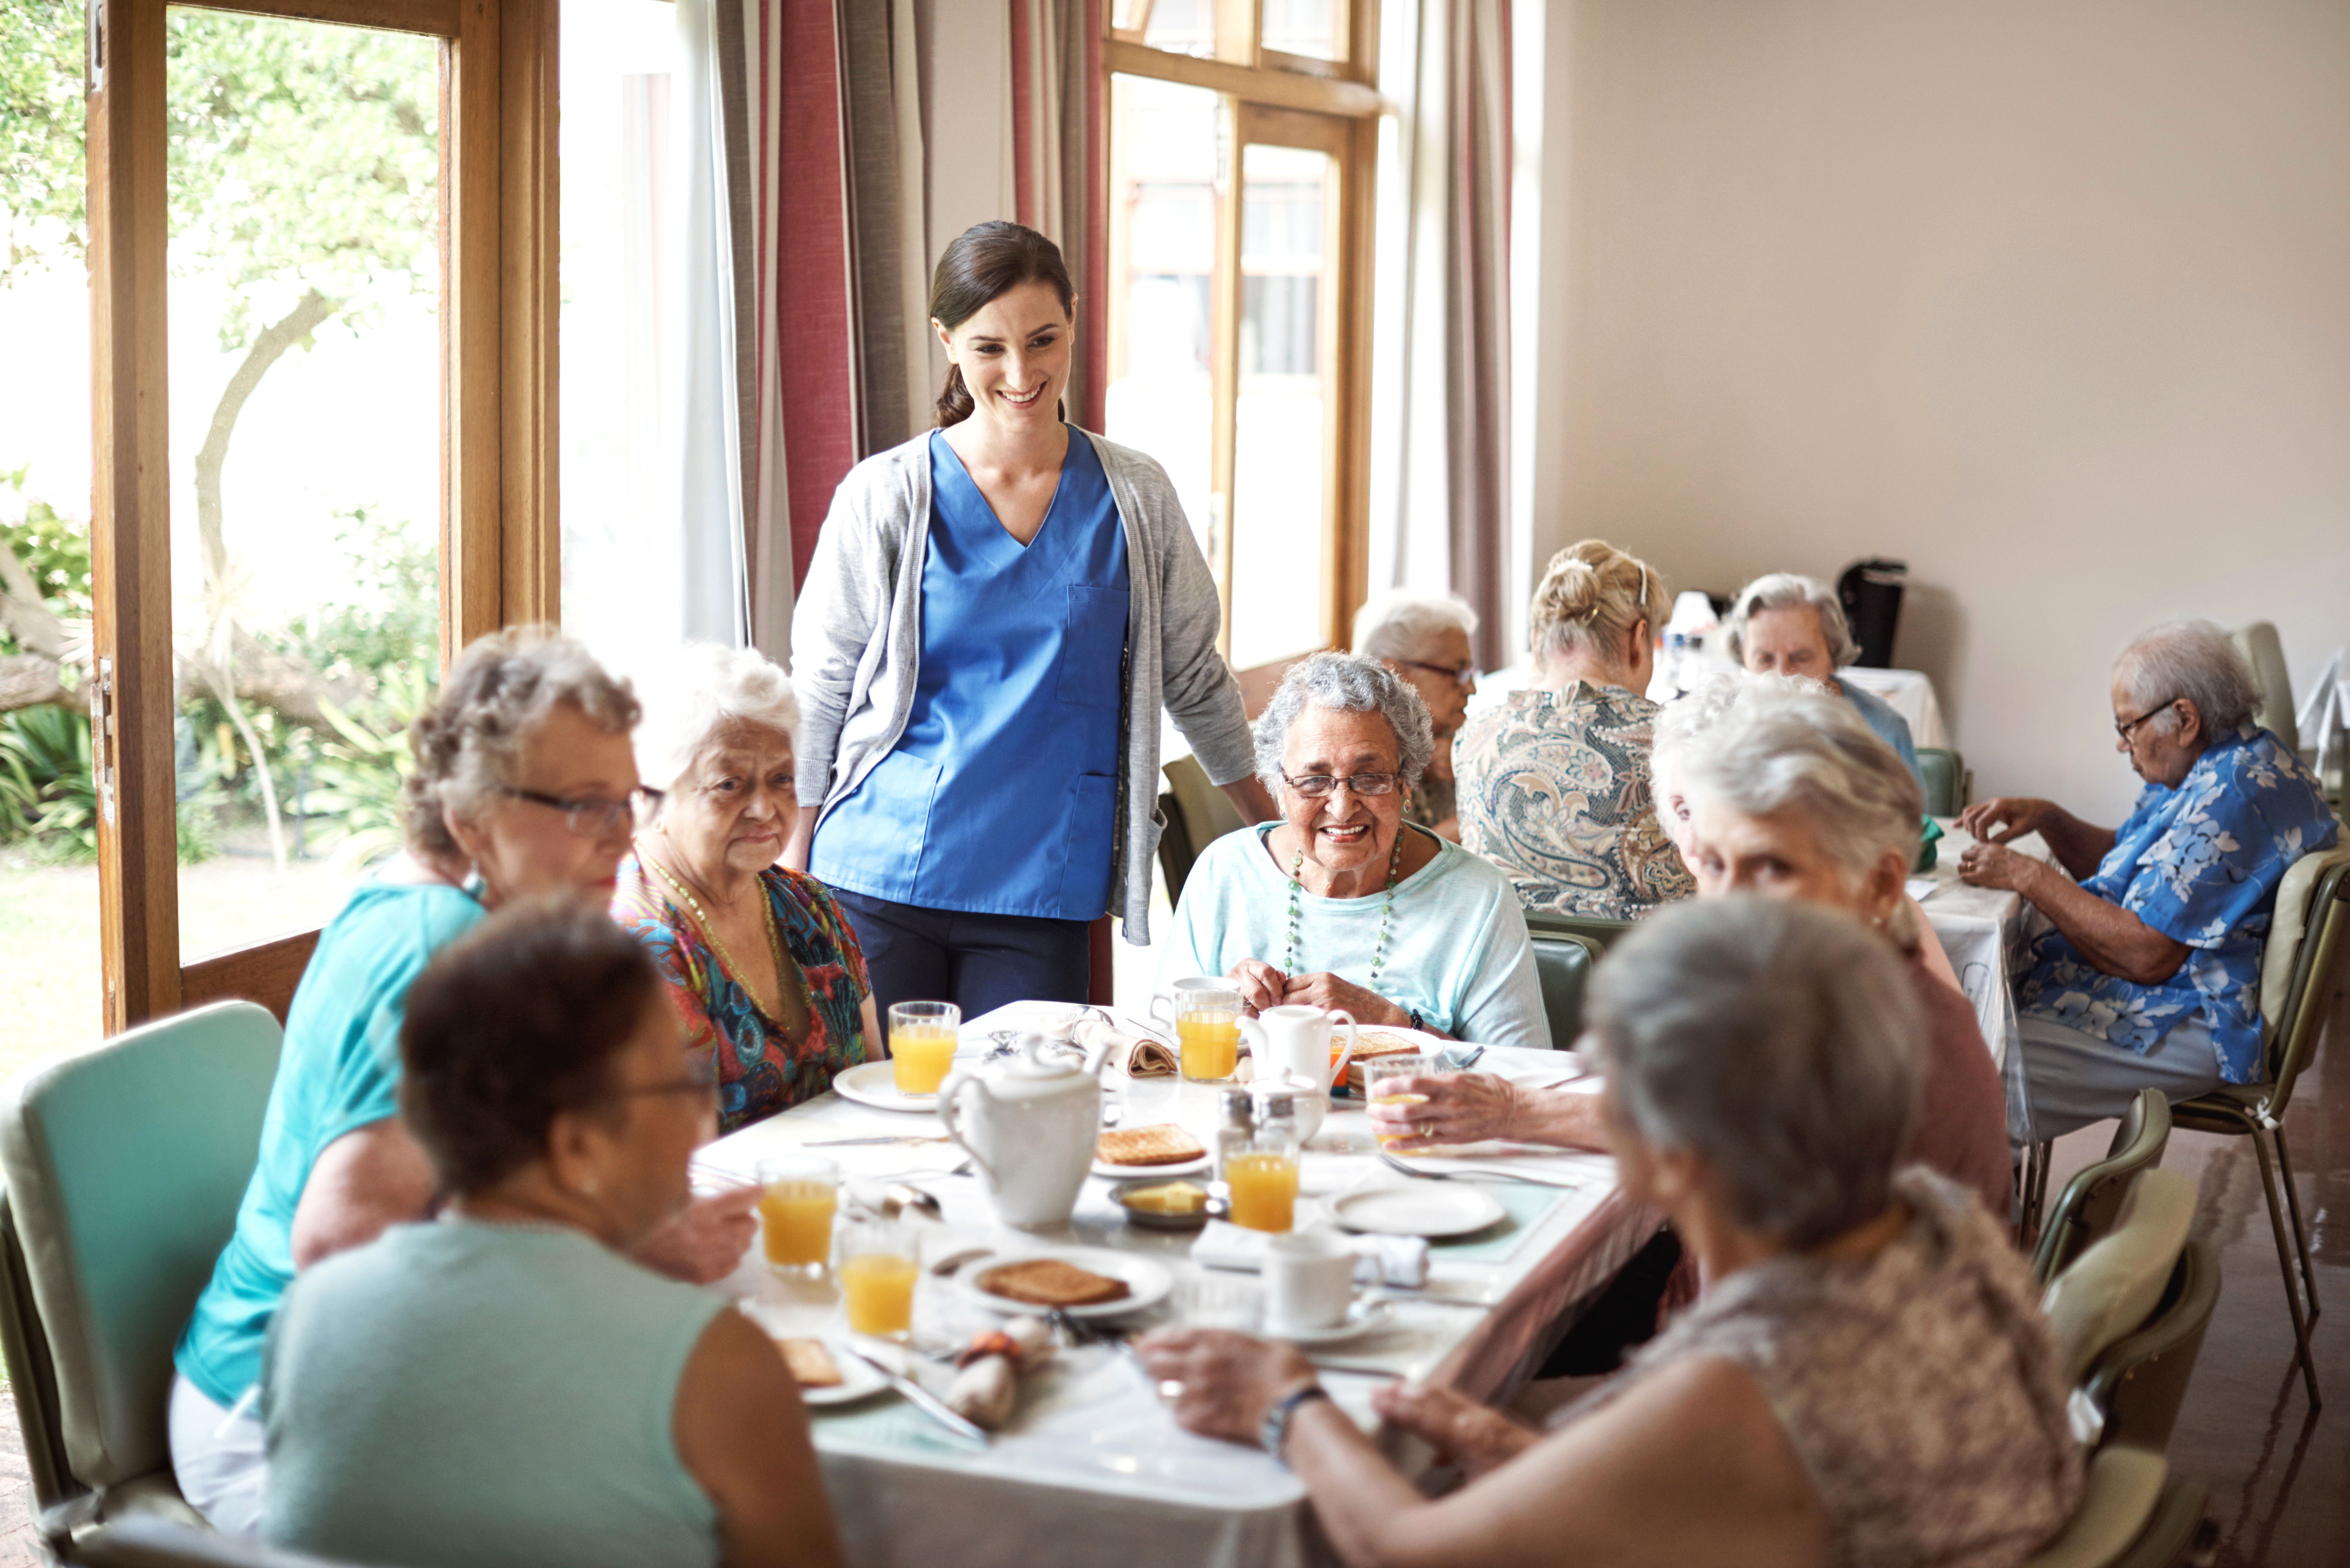 PSW supervising breakfast in a retirement residence